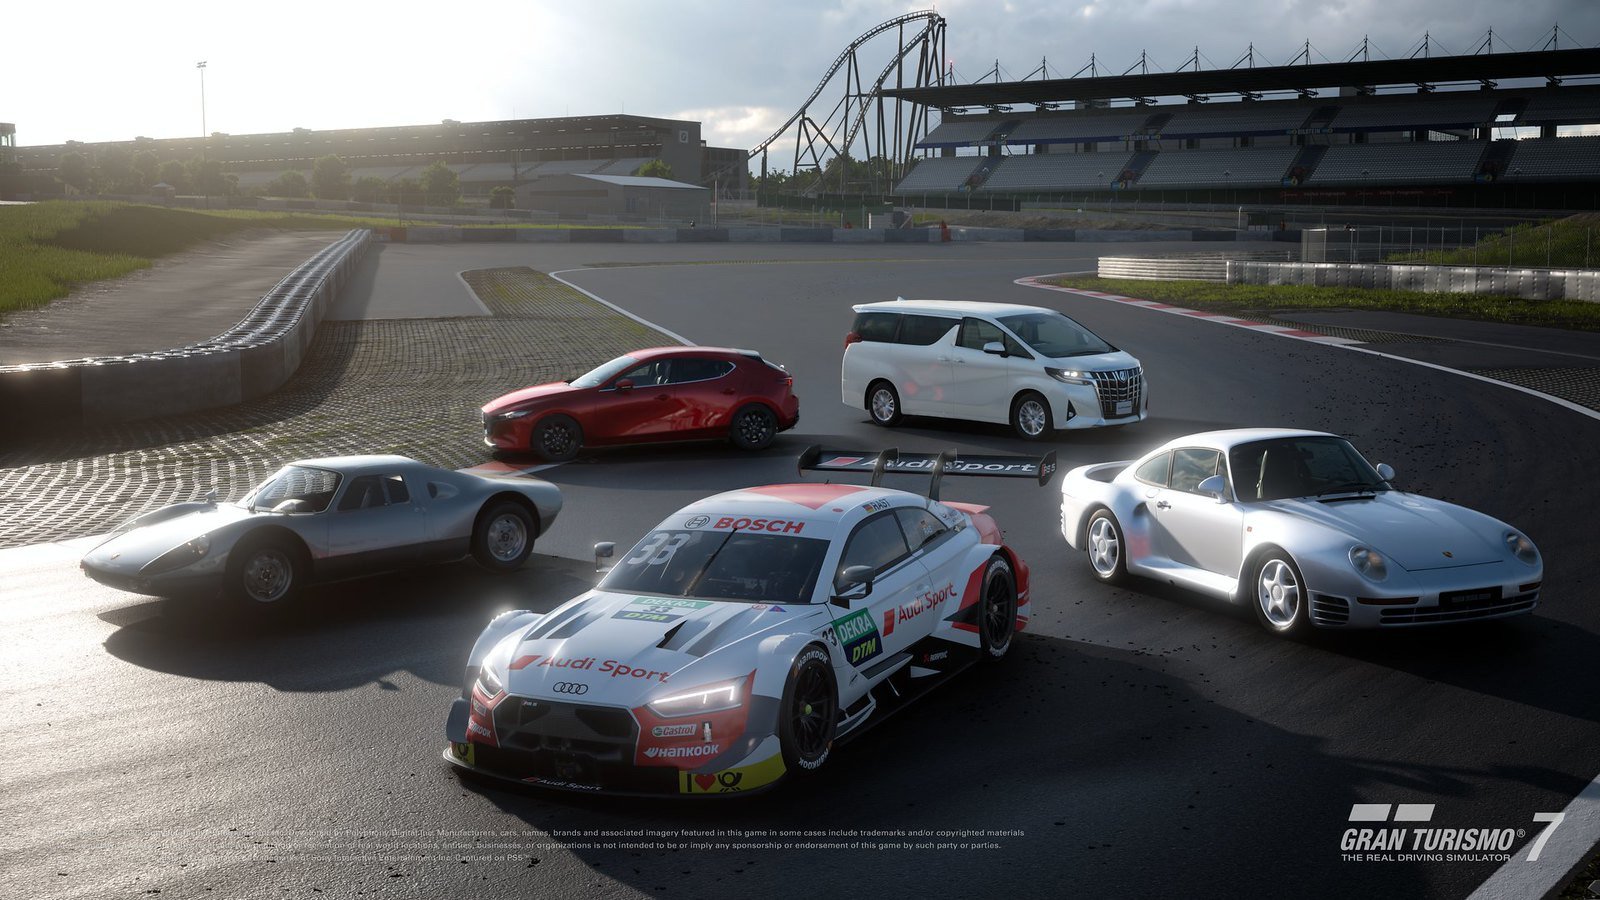 GT7 Update 1.40 comfirmed, 7 new cars, a new track, and LARGE